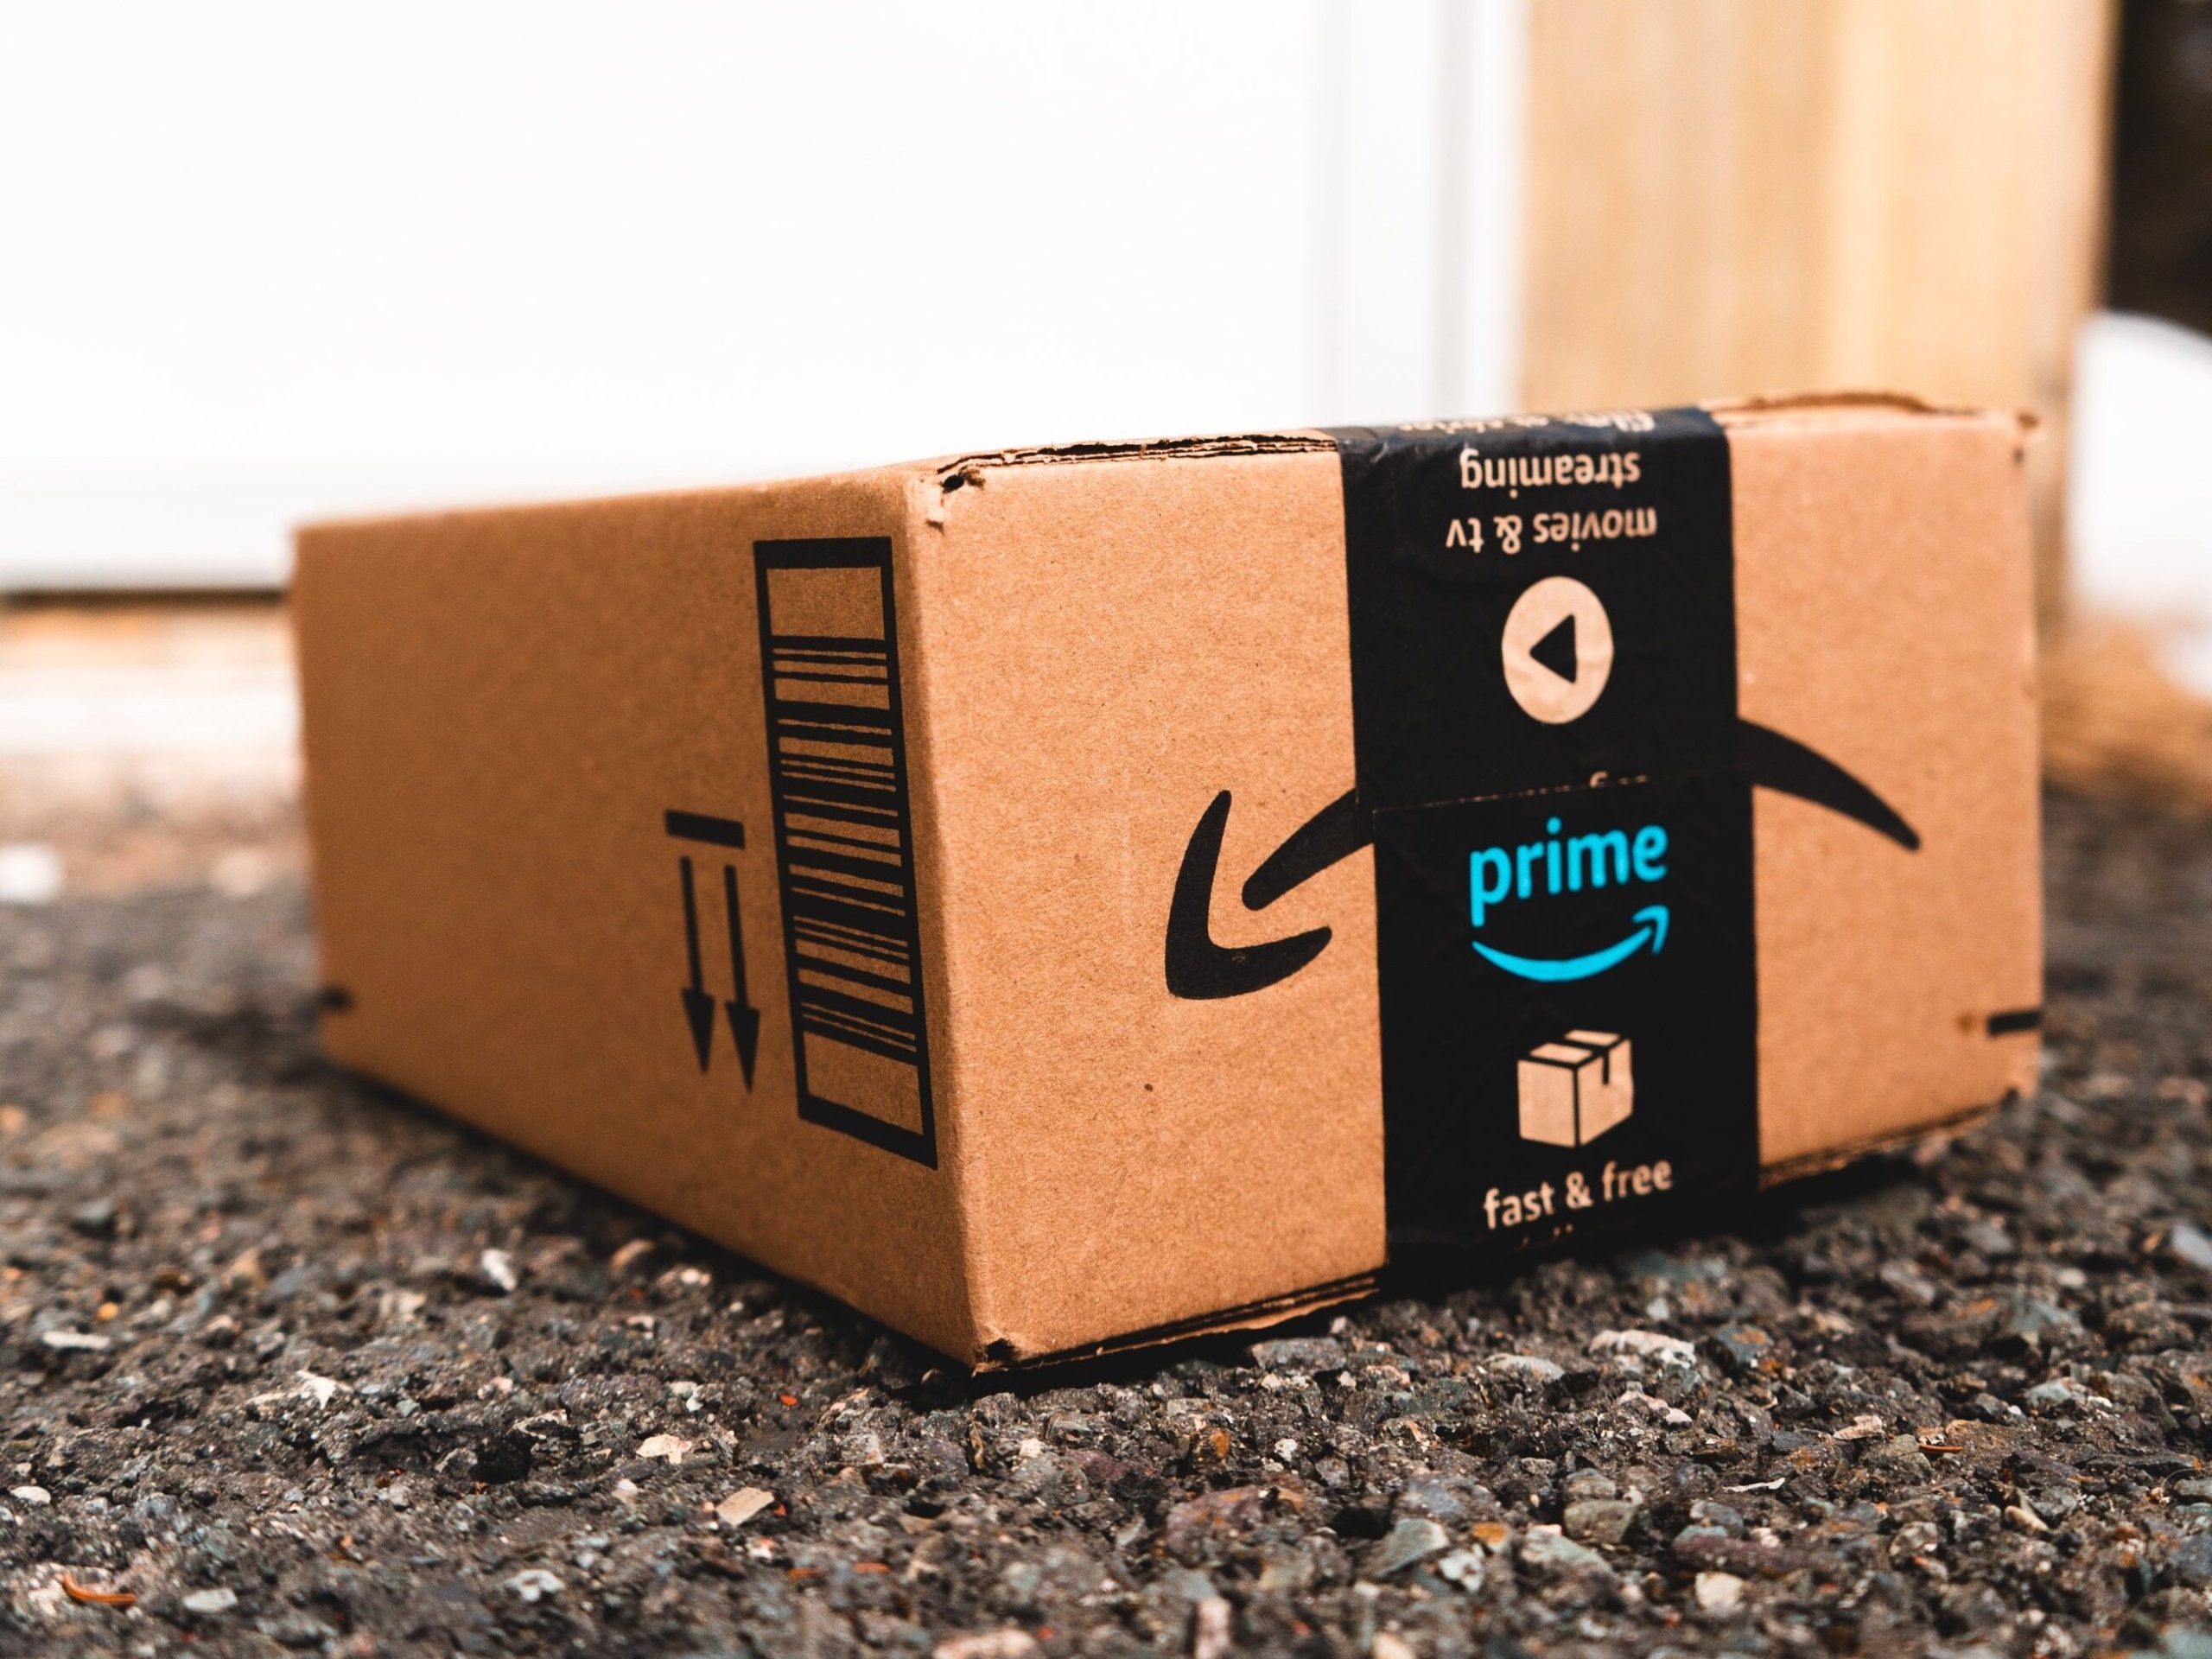 A woman receives packages from Amazon every day.  She didn't order one